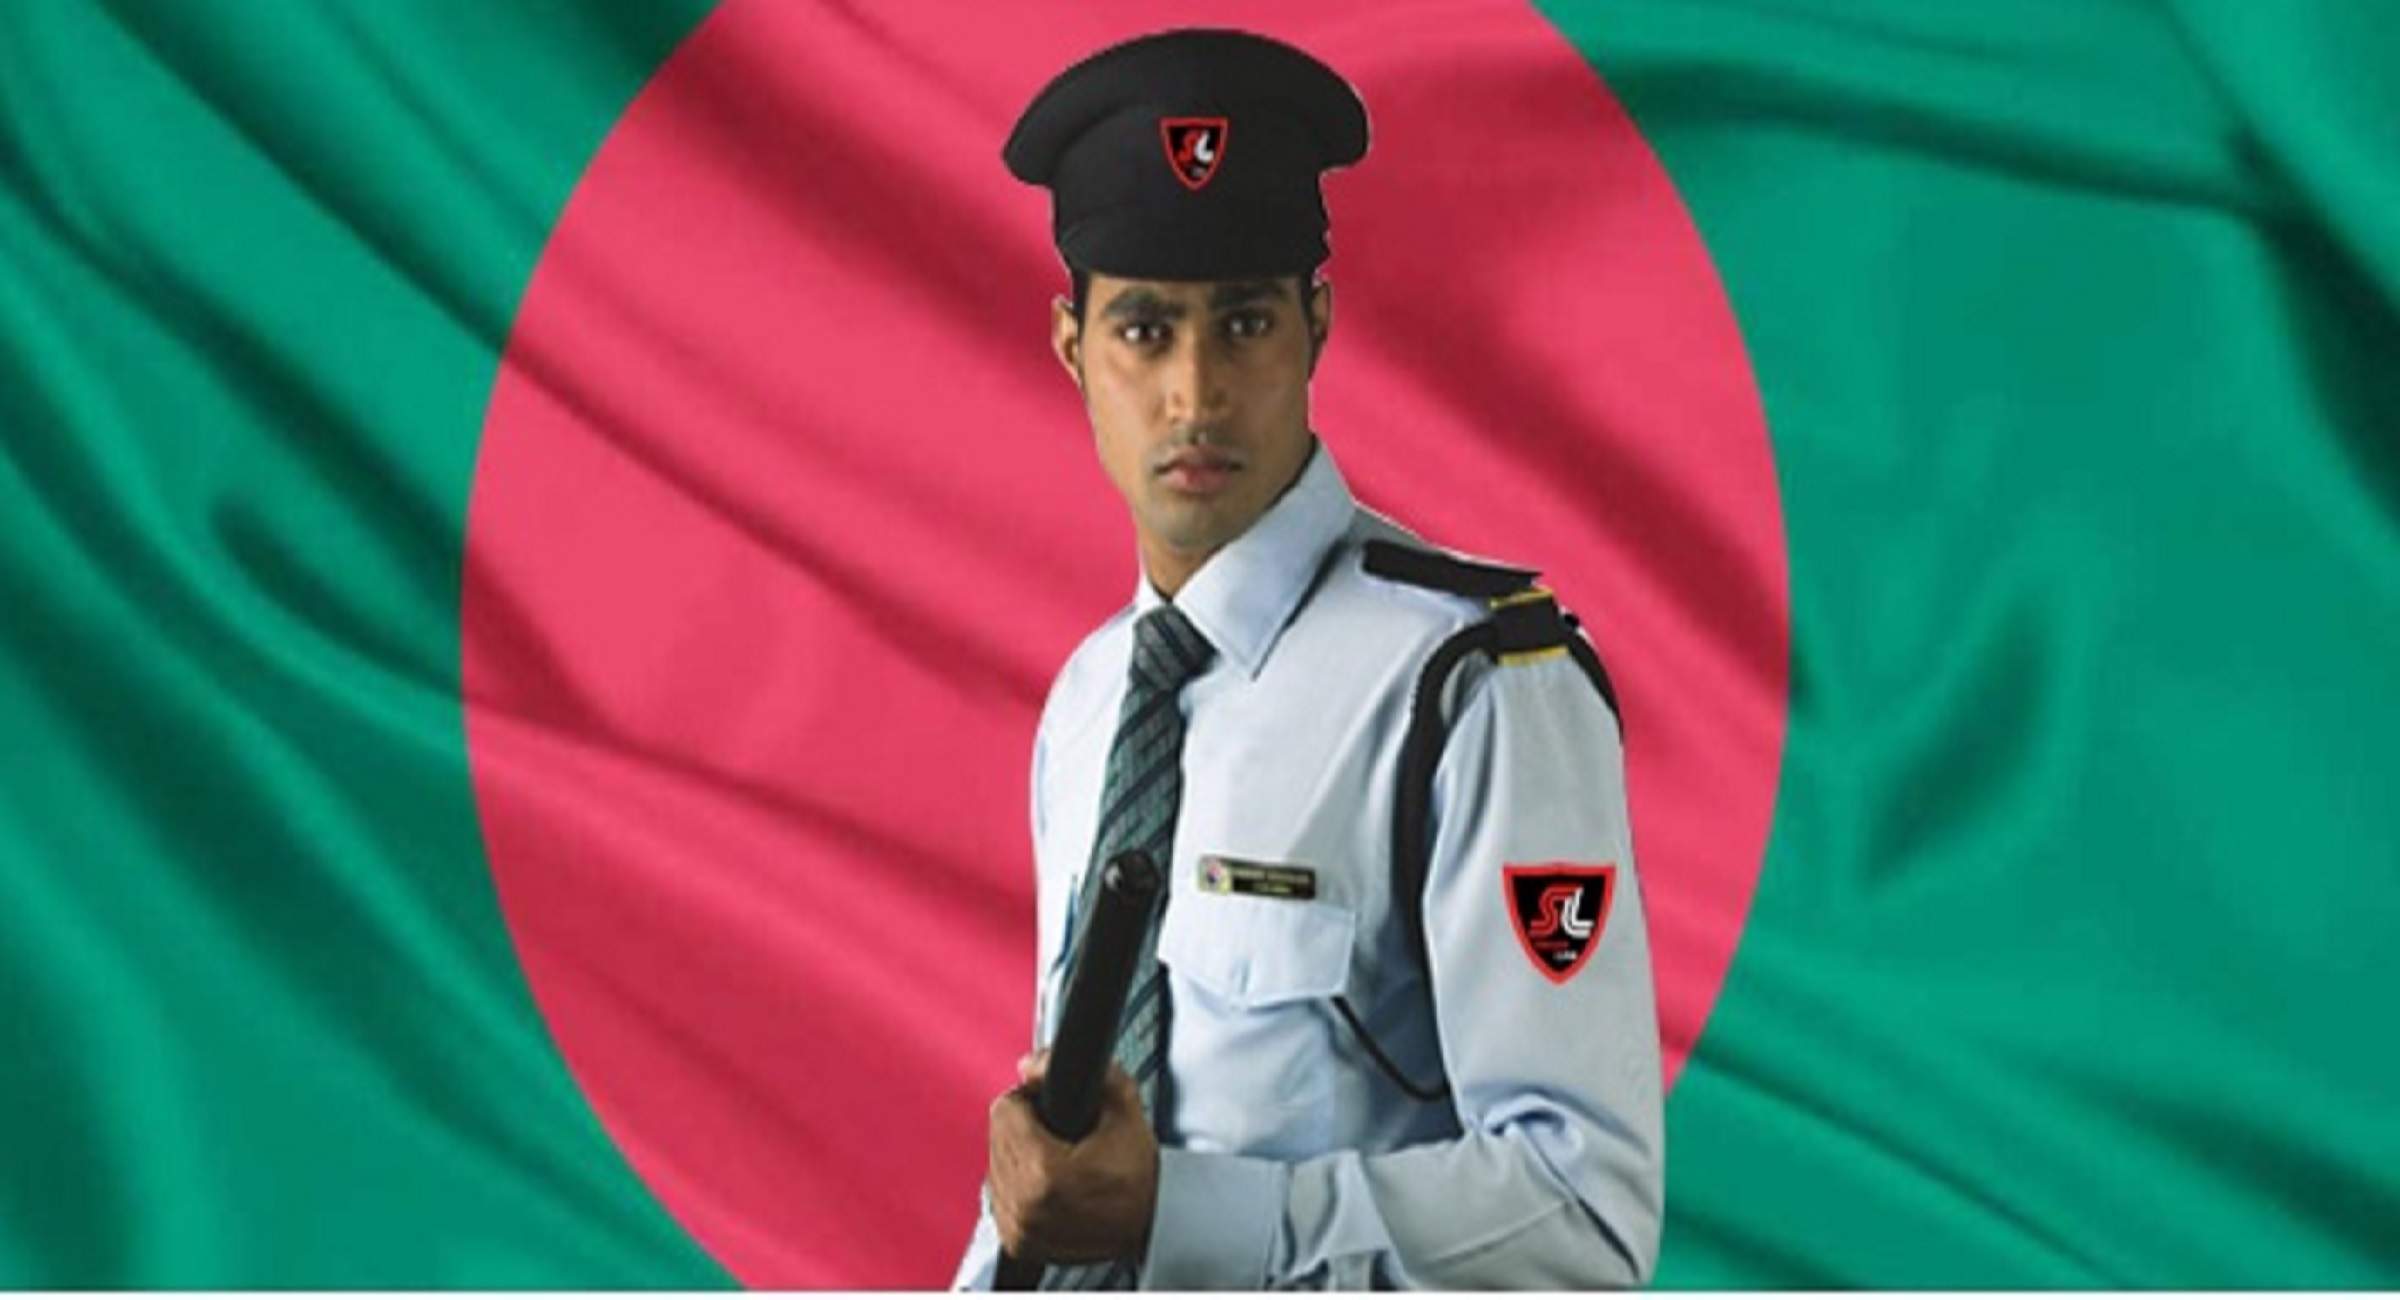 best security guard services provider company in Dhaka Bangladesh